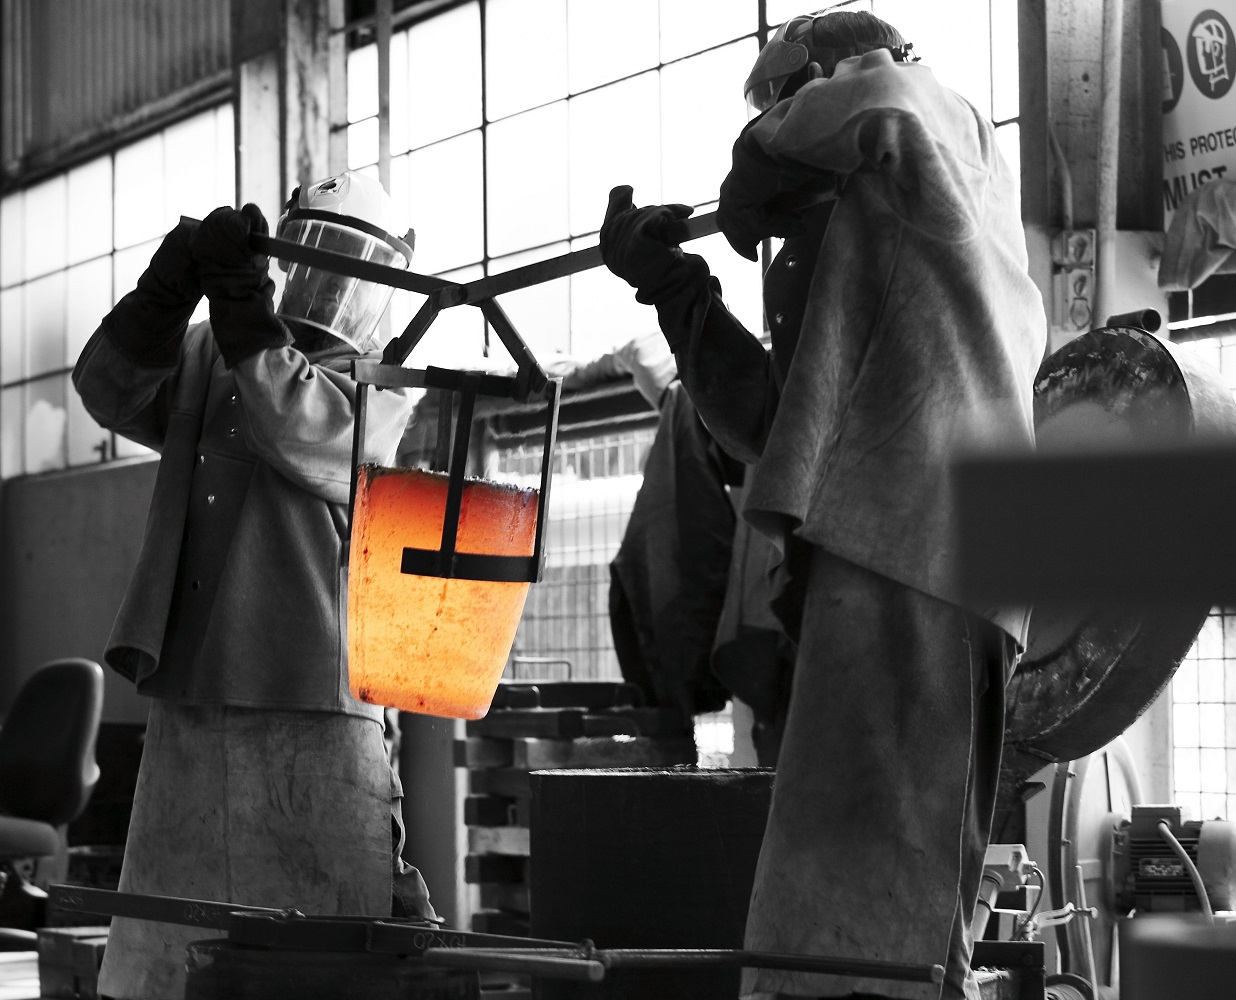 This is an image of two metal workers holding a hot crucible.